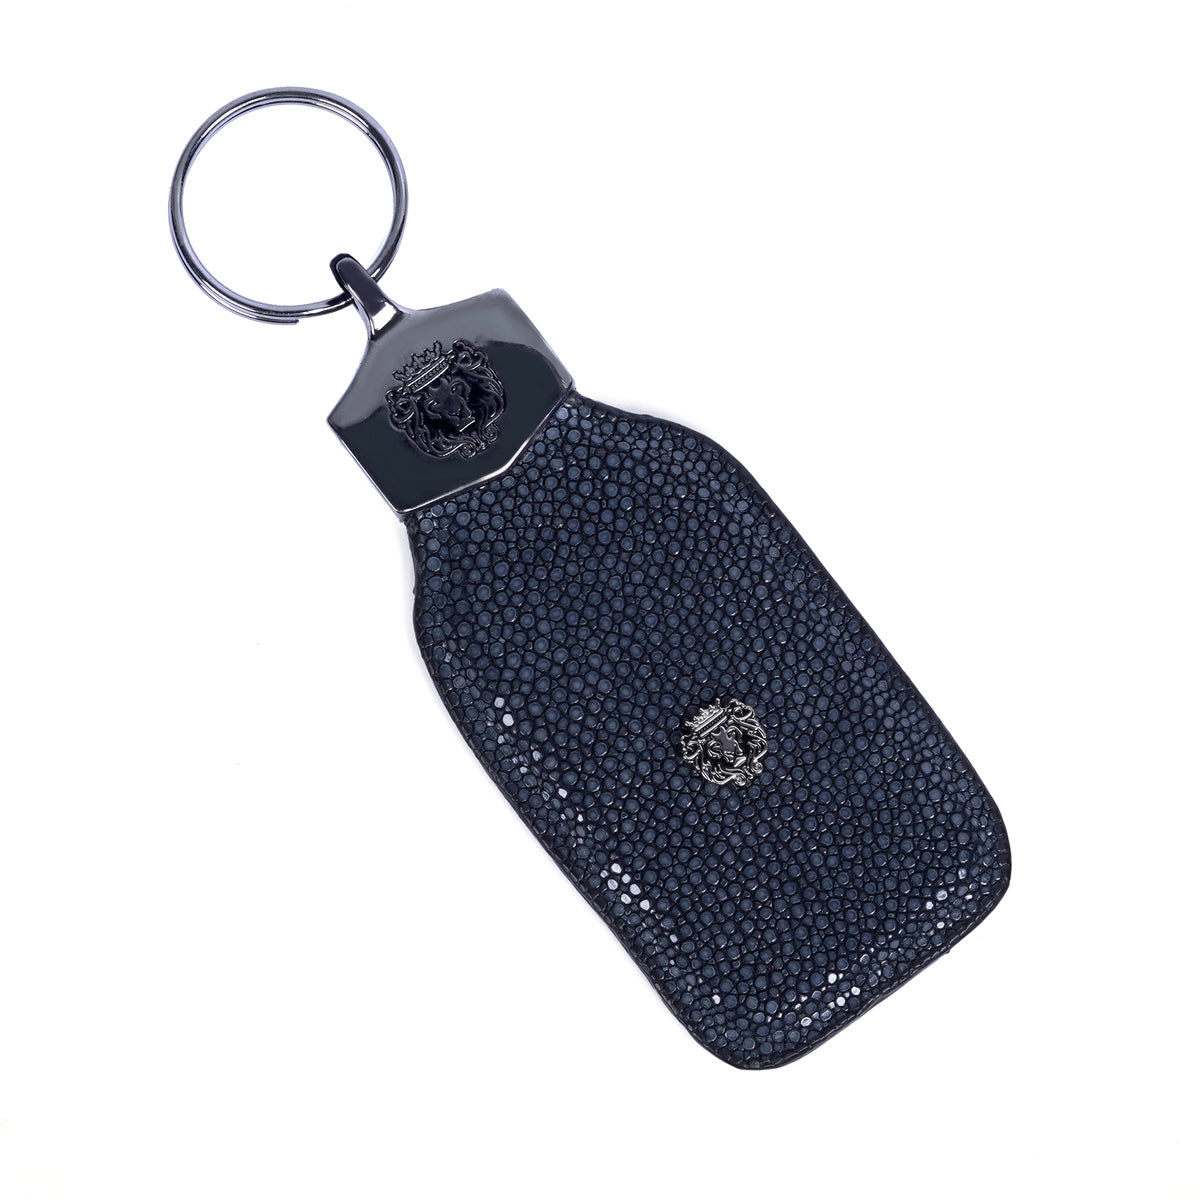 Exotic Stingray Fish Leather Key Chain with Silver Finish Lion